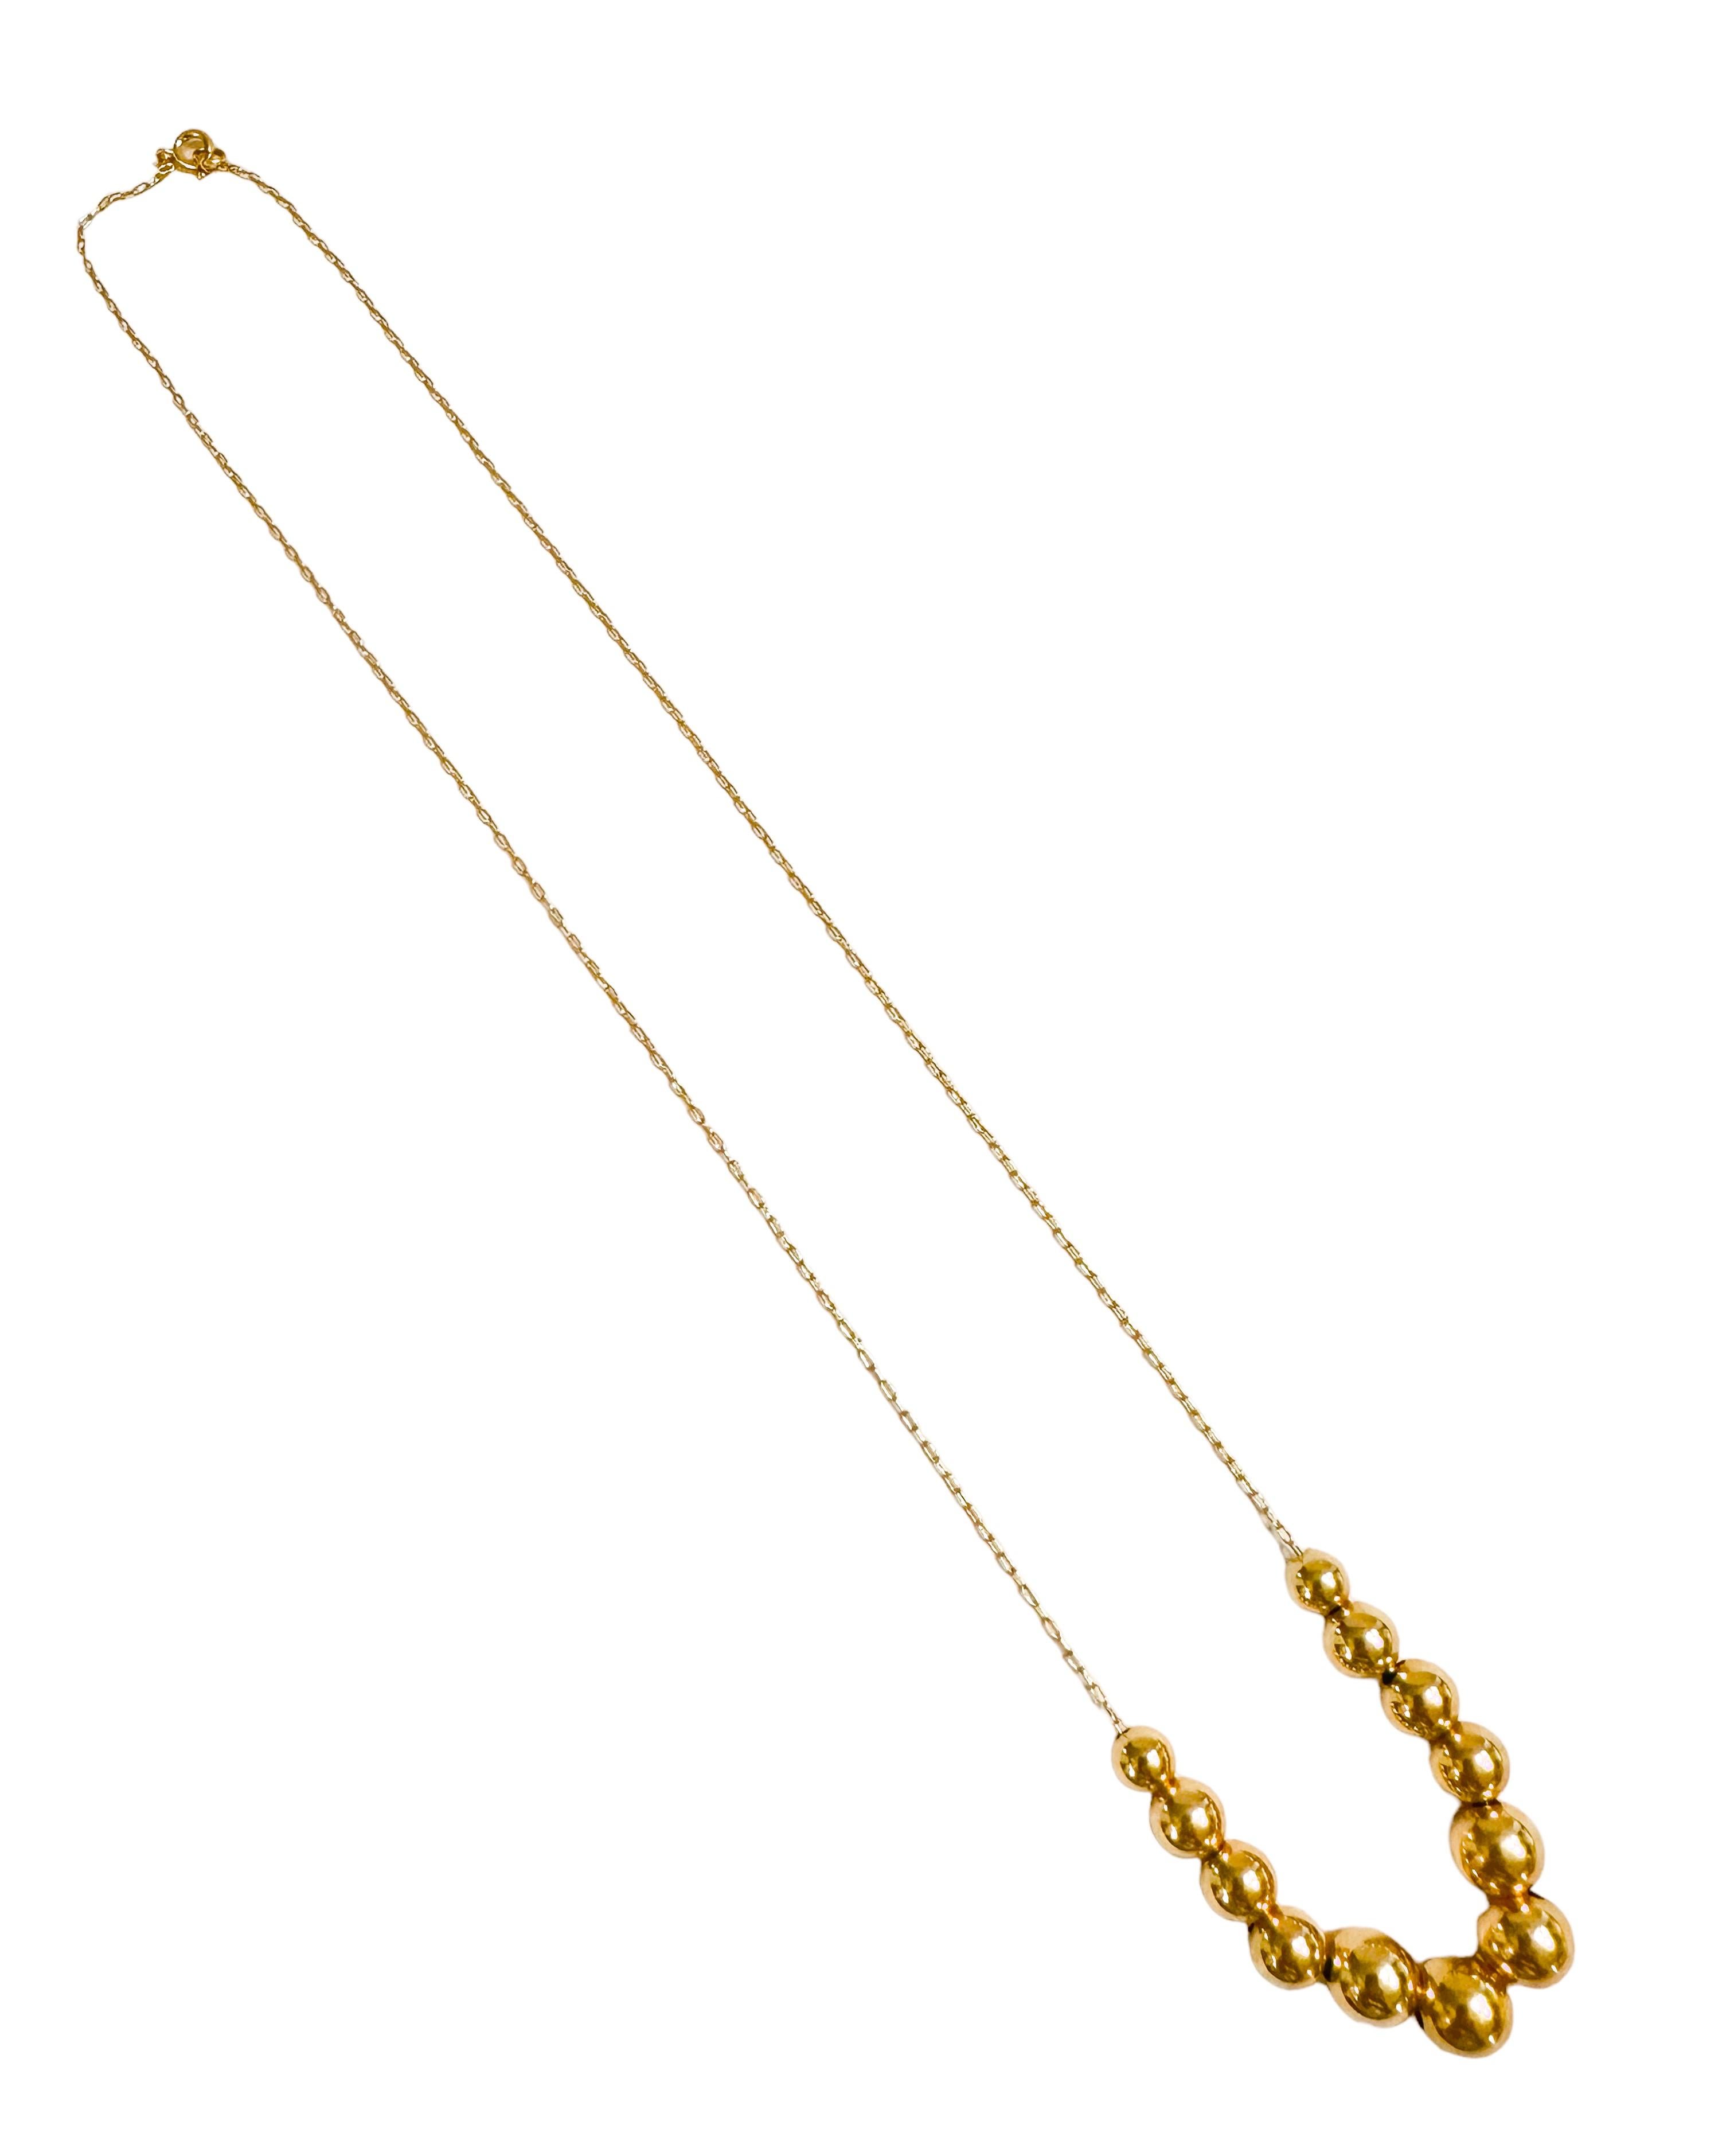 14K Yellow Gold Hollow Graduated Beaded Chain Necklace In Excellent Condition For Sale In Eagan, MN